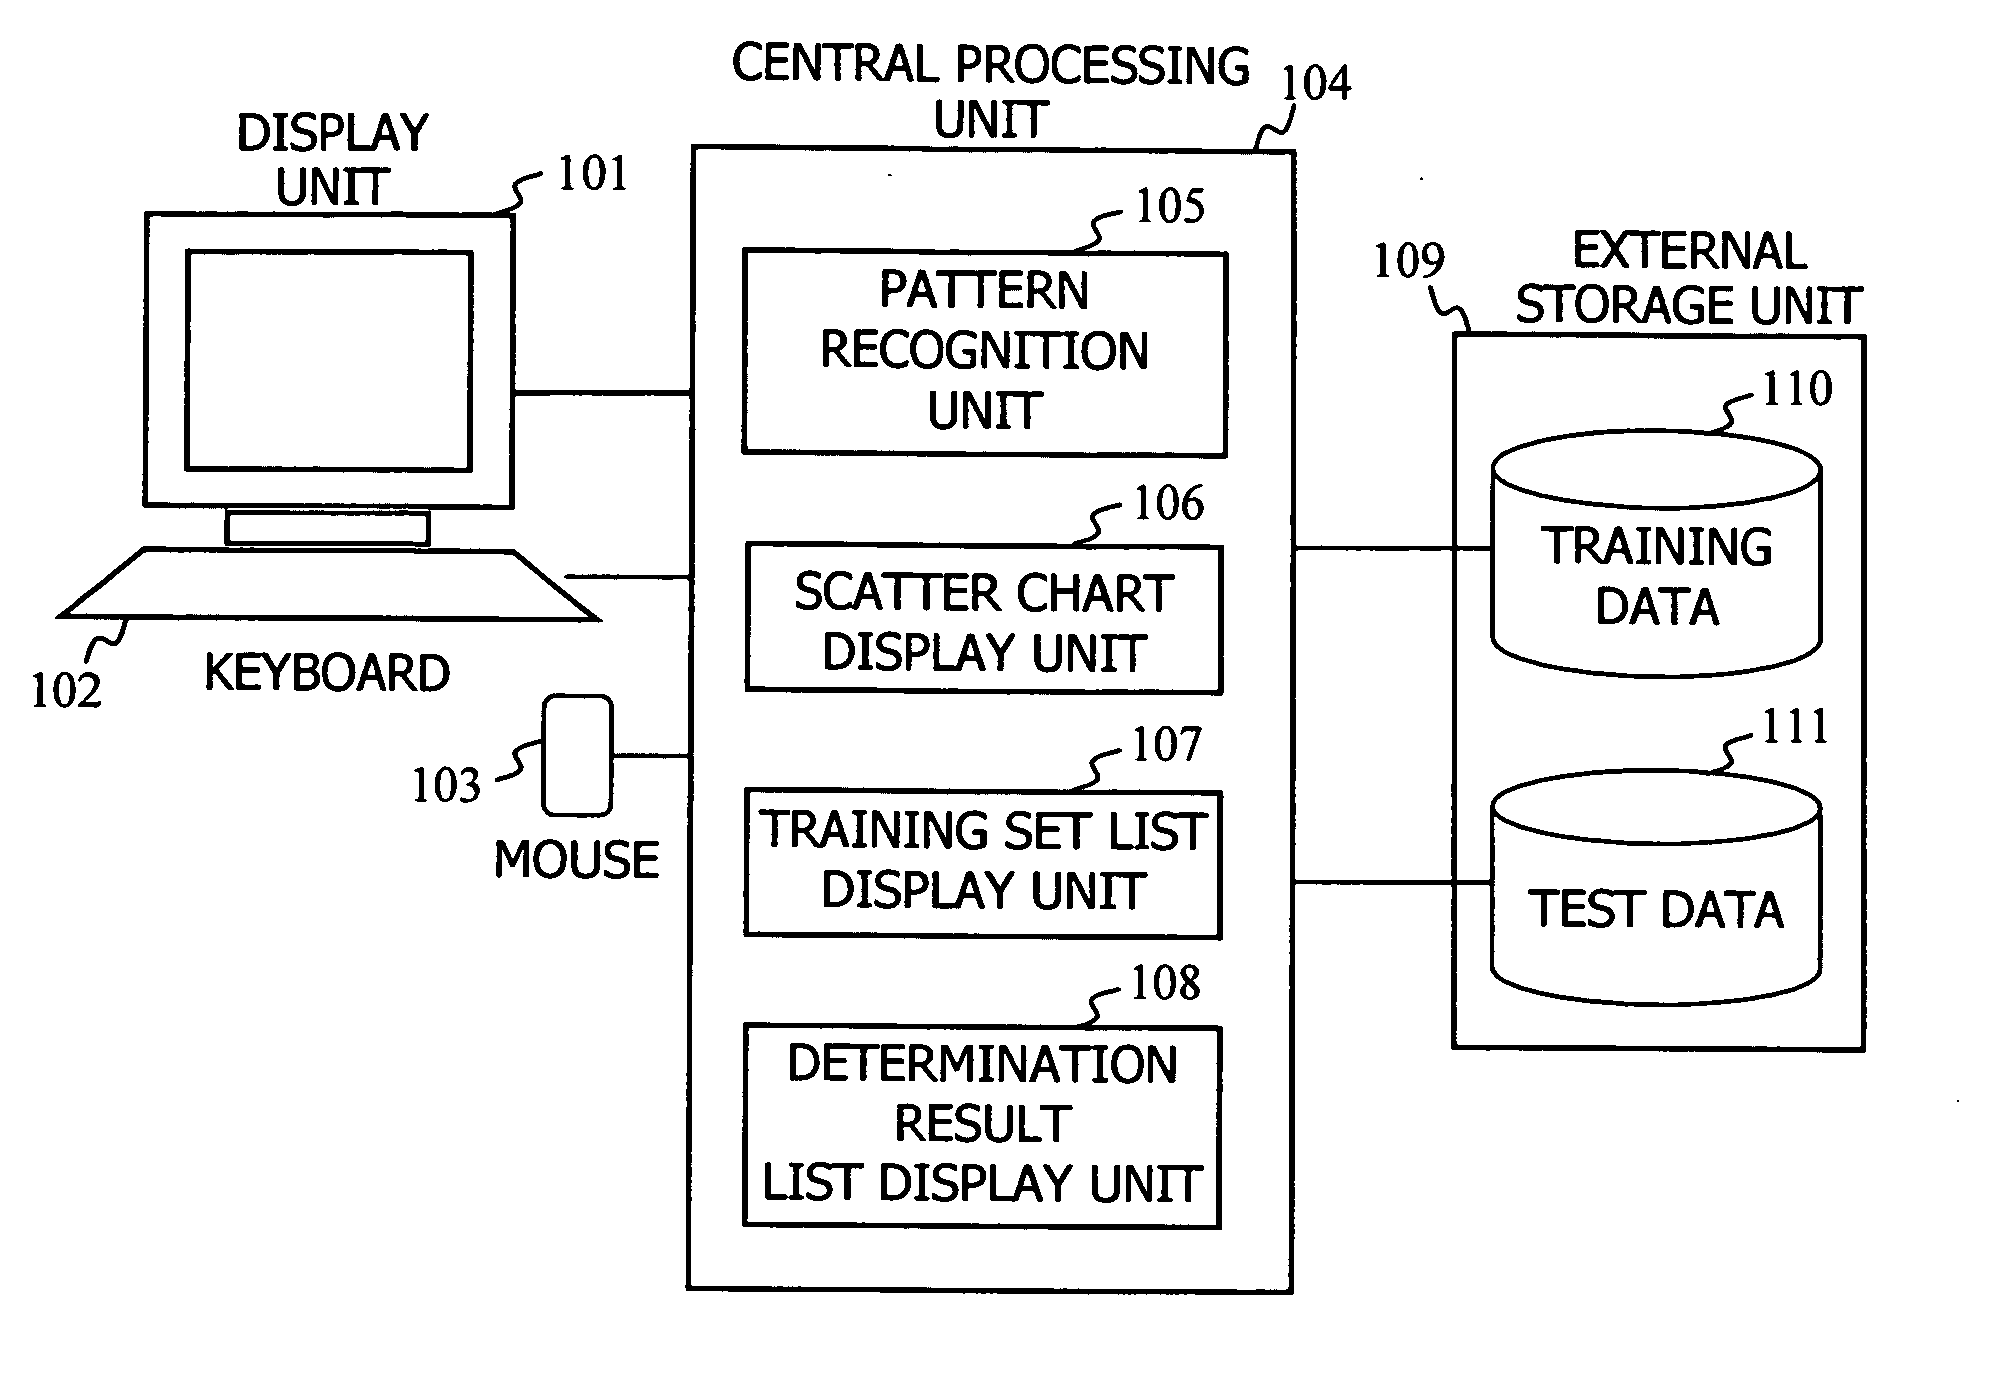 Pattern recognition system utilizing an expression profile